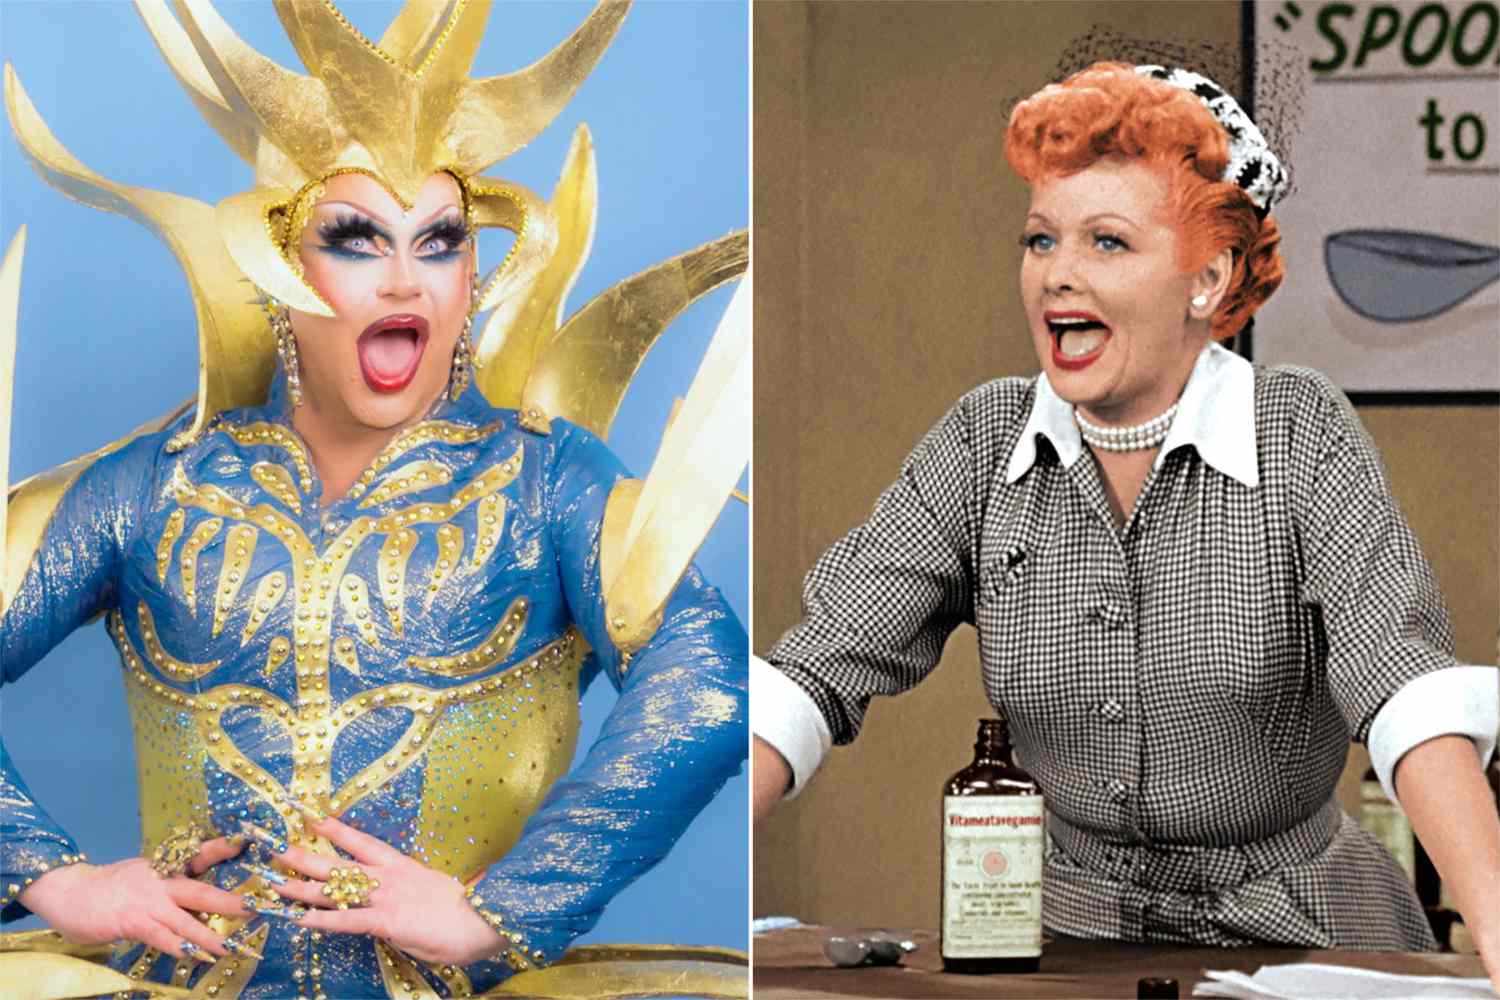 'Drag Race' star Shannel owns Lucille Ball's makeup and 'I Love Lucy' shoes